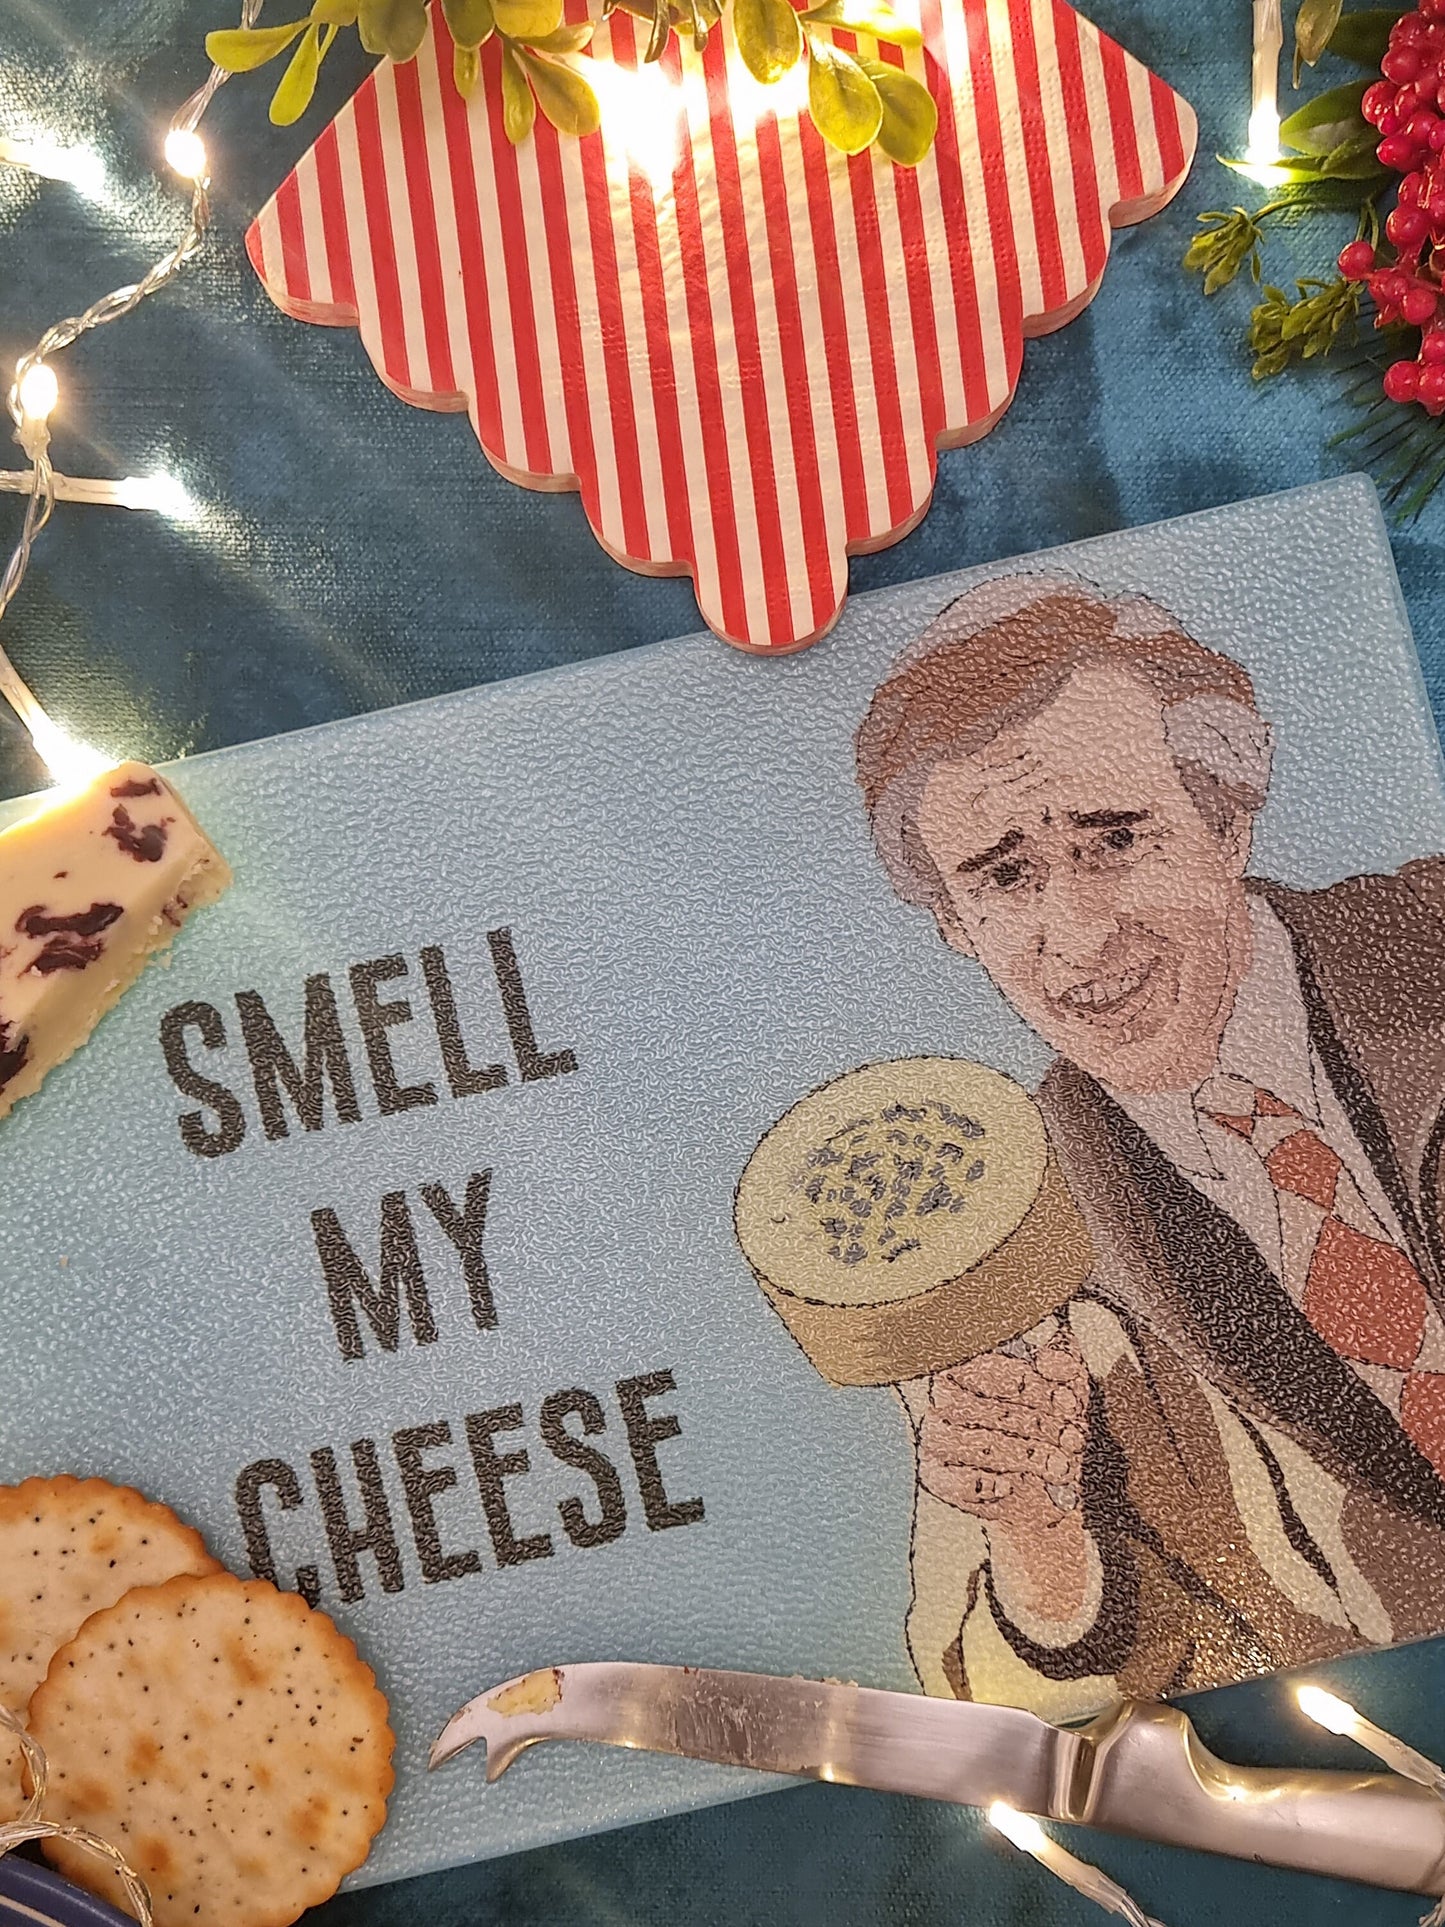 Alan Partridge Smell My Cheese Board Glass Cutting Chopping board A4 Father's Day Gift Funny